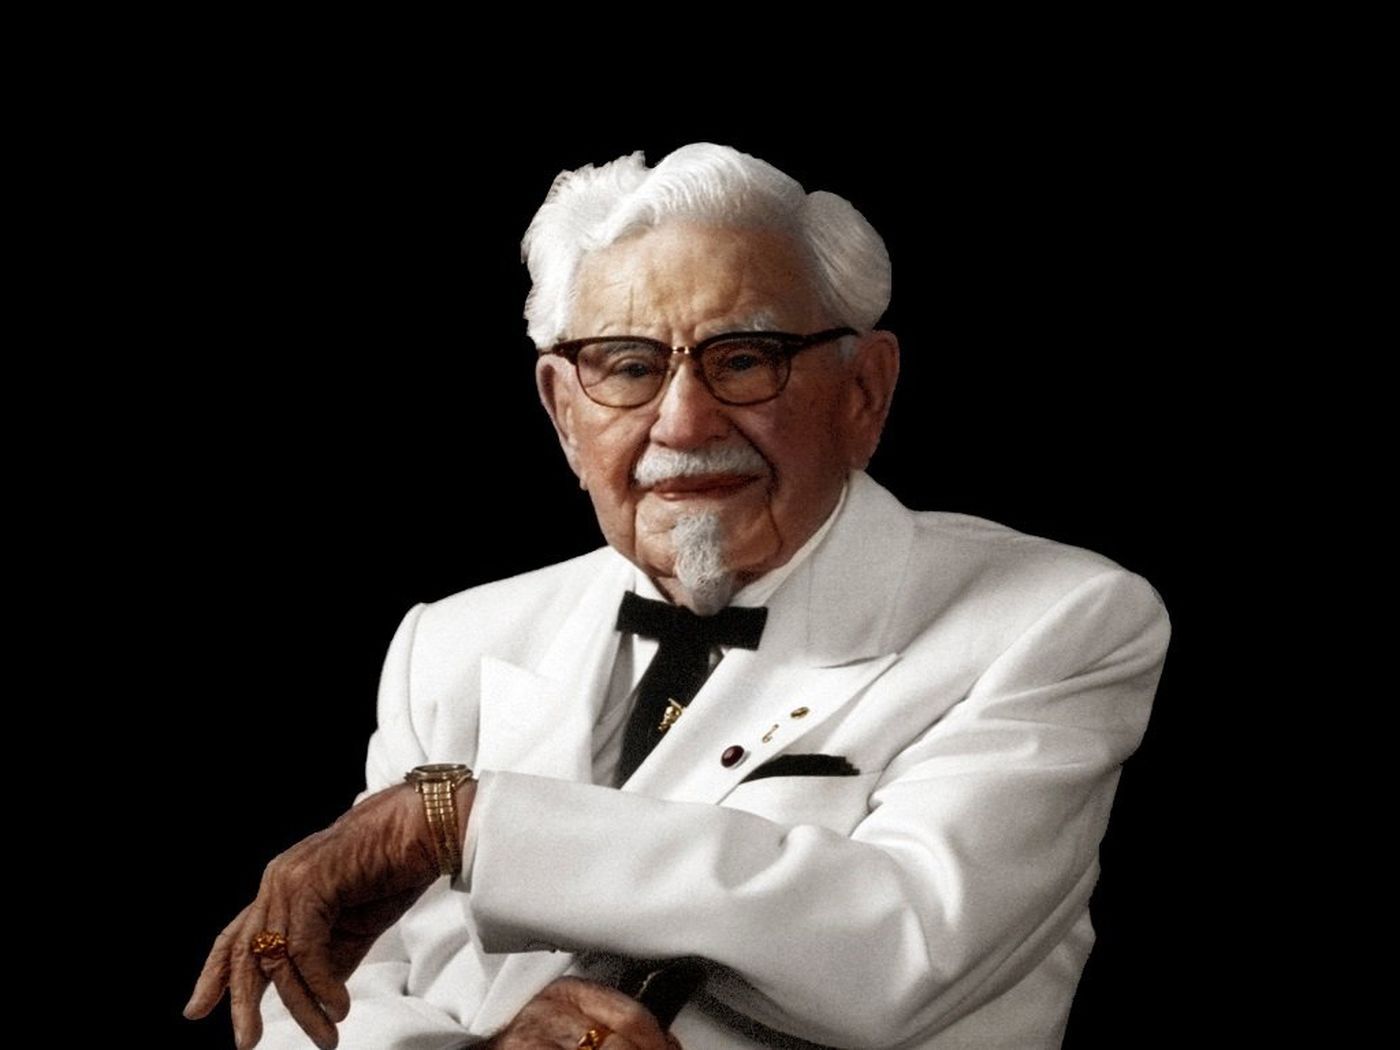 The real story of Colonel Sanders is far crazier than this bland inspirational meme